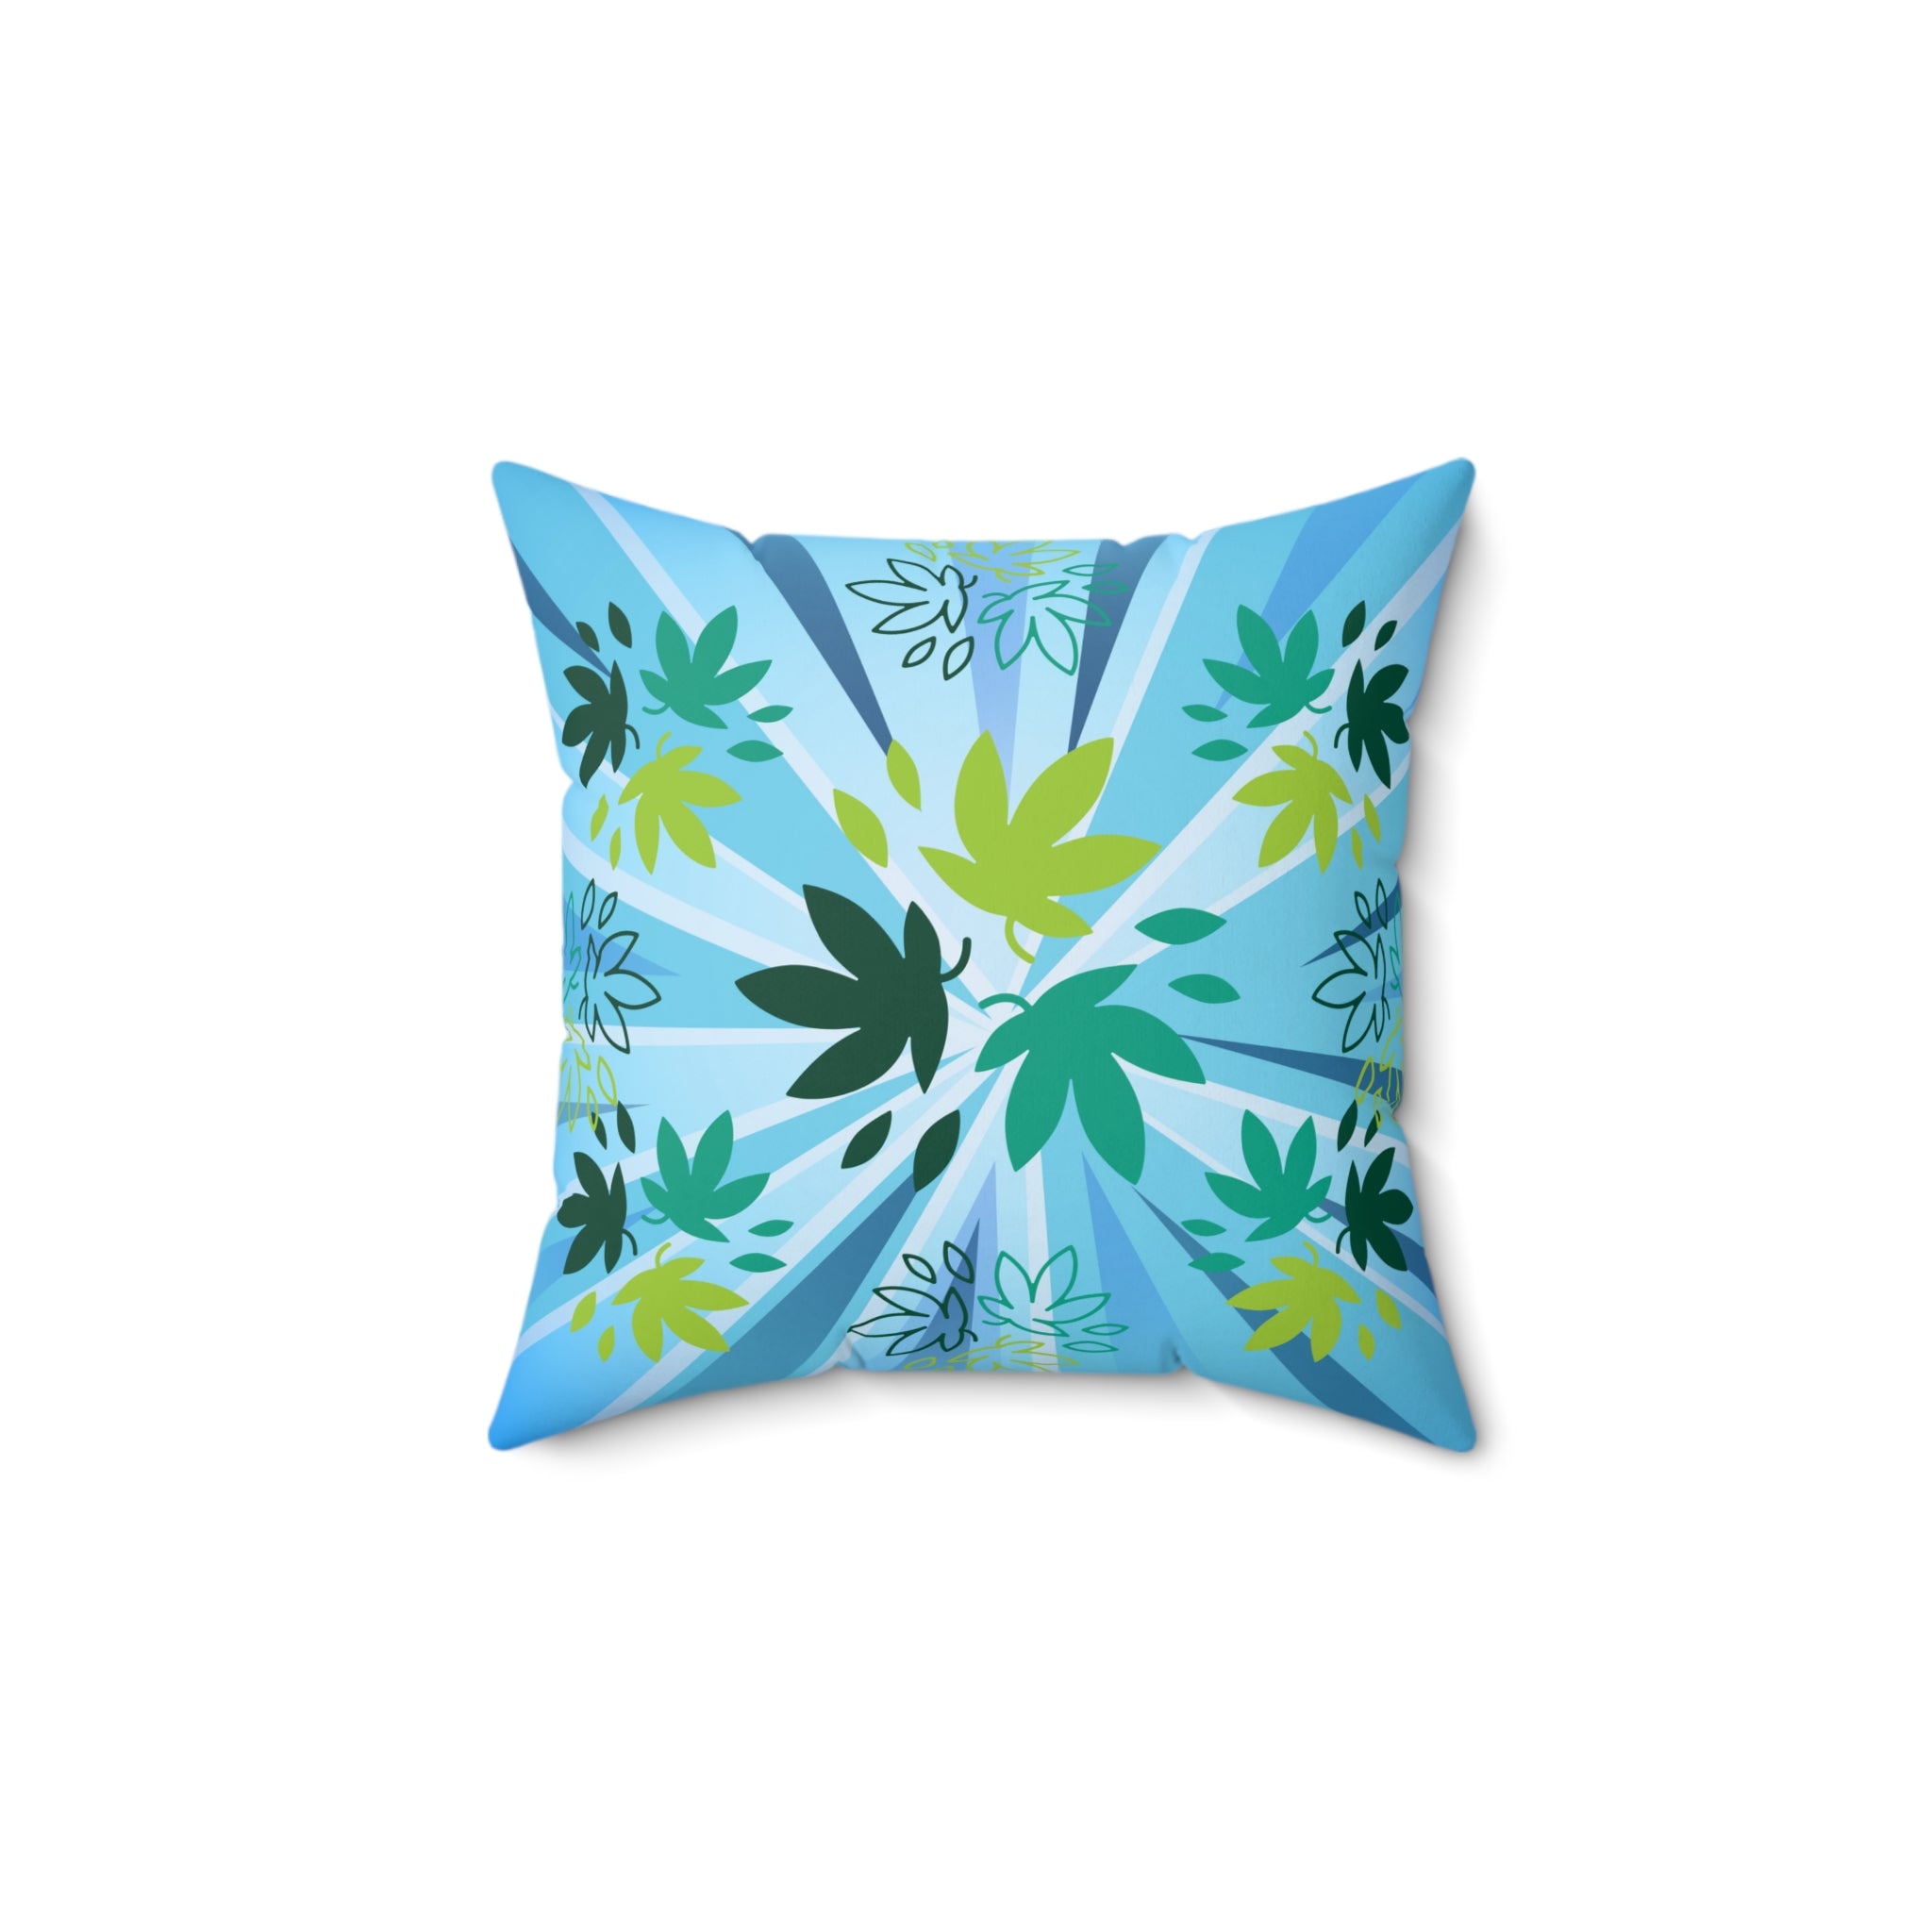 Summer Vibes Cannabis Themed Square Pillow